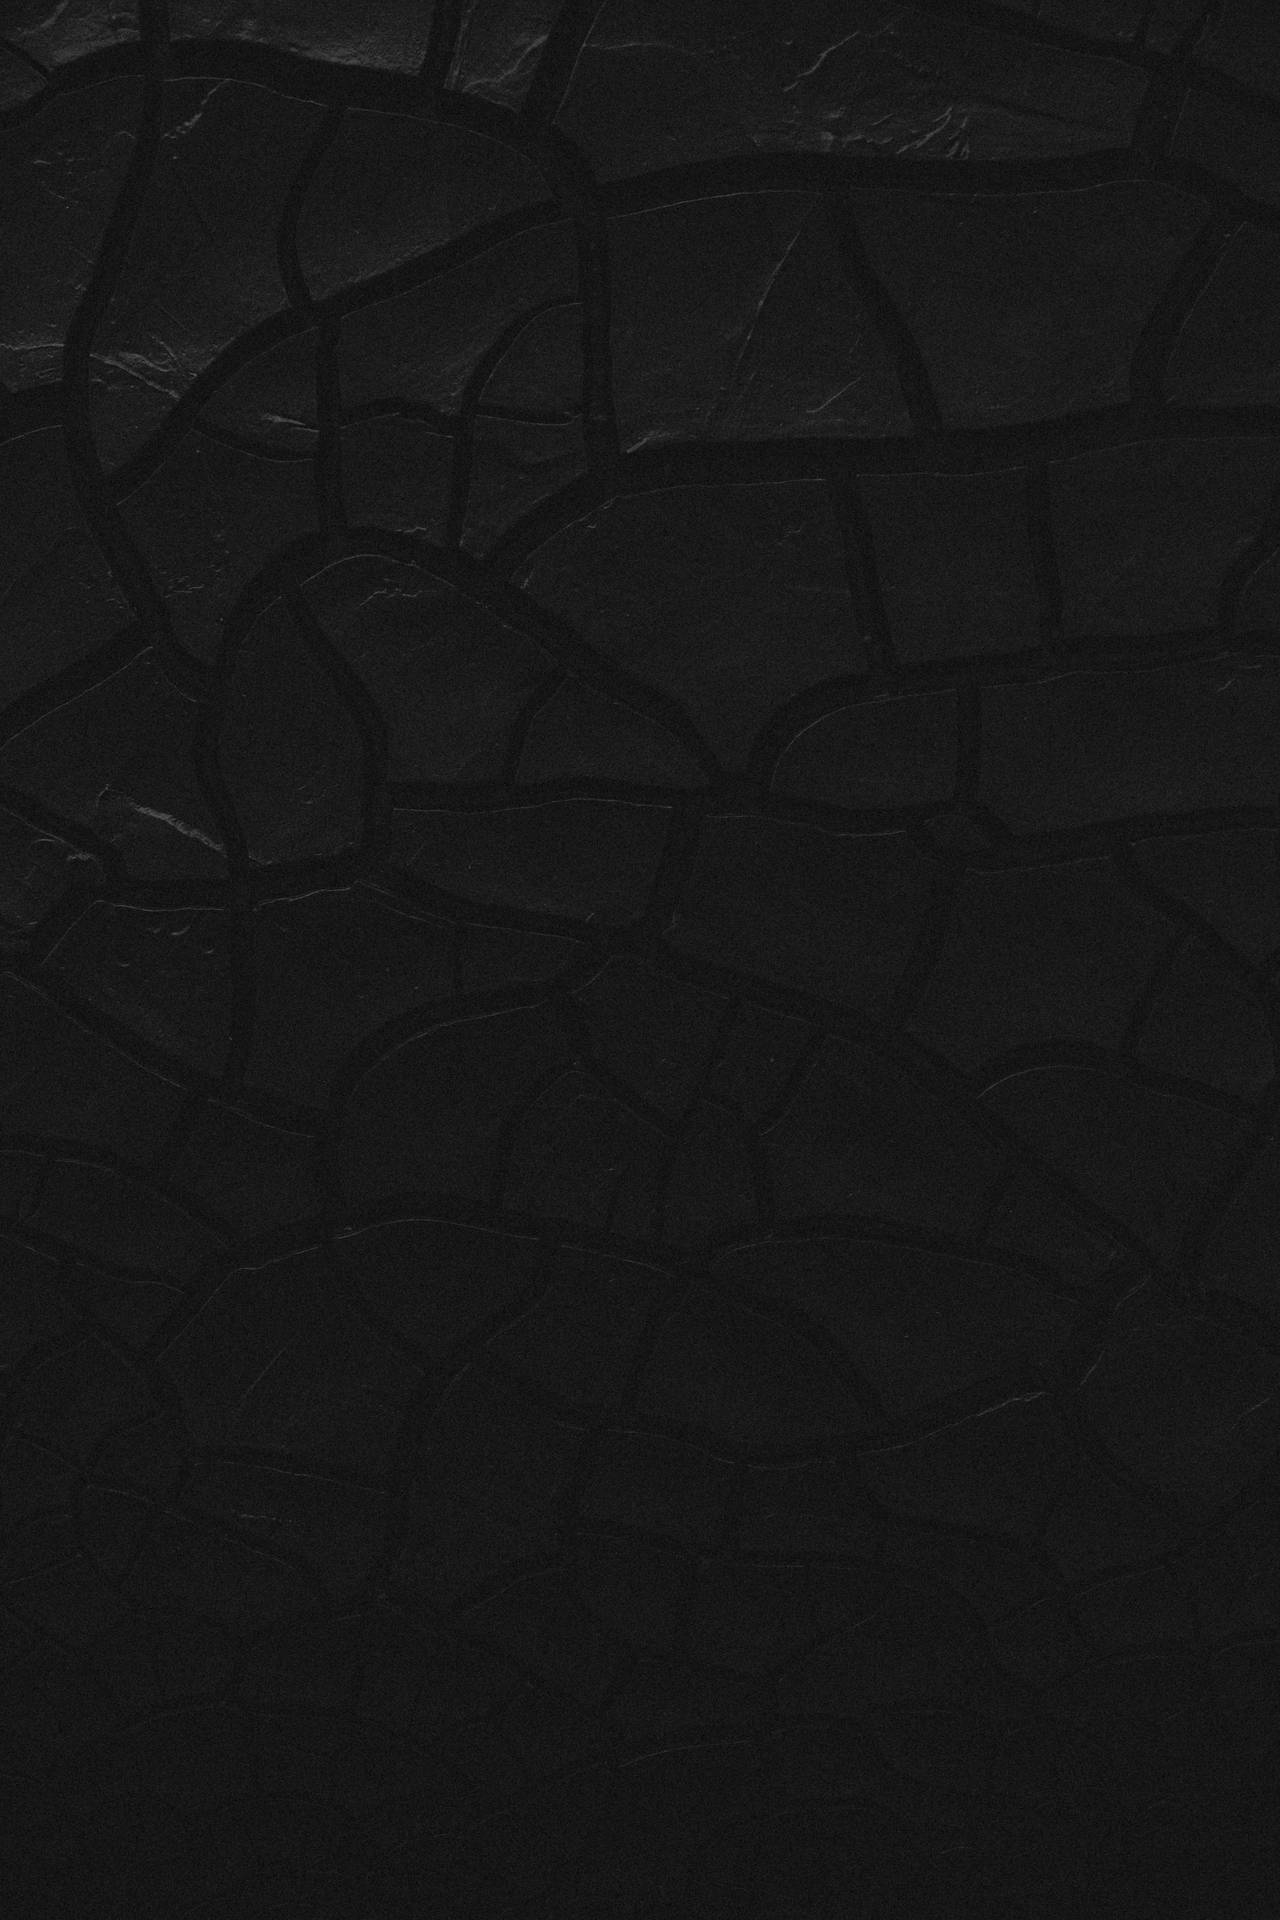 Plain Black With Cracked Surface Wallpaper